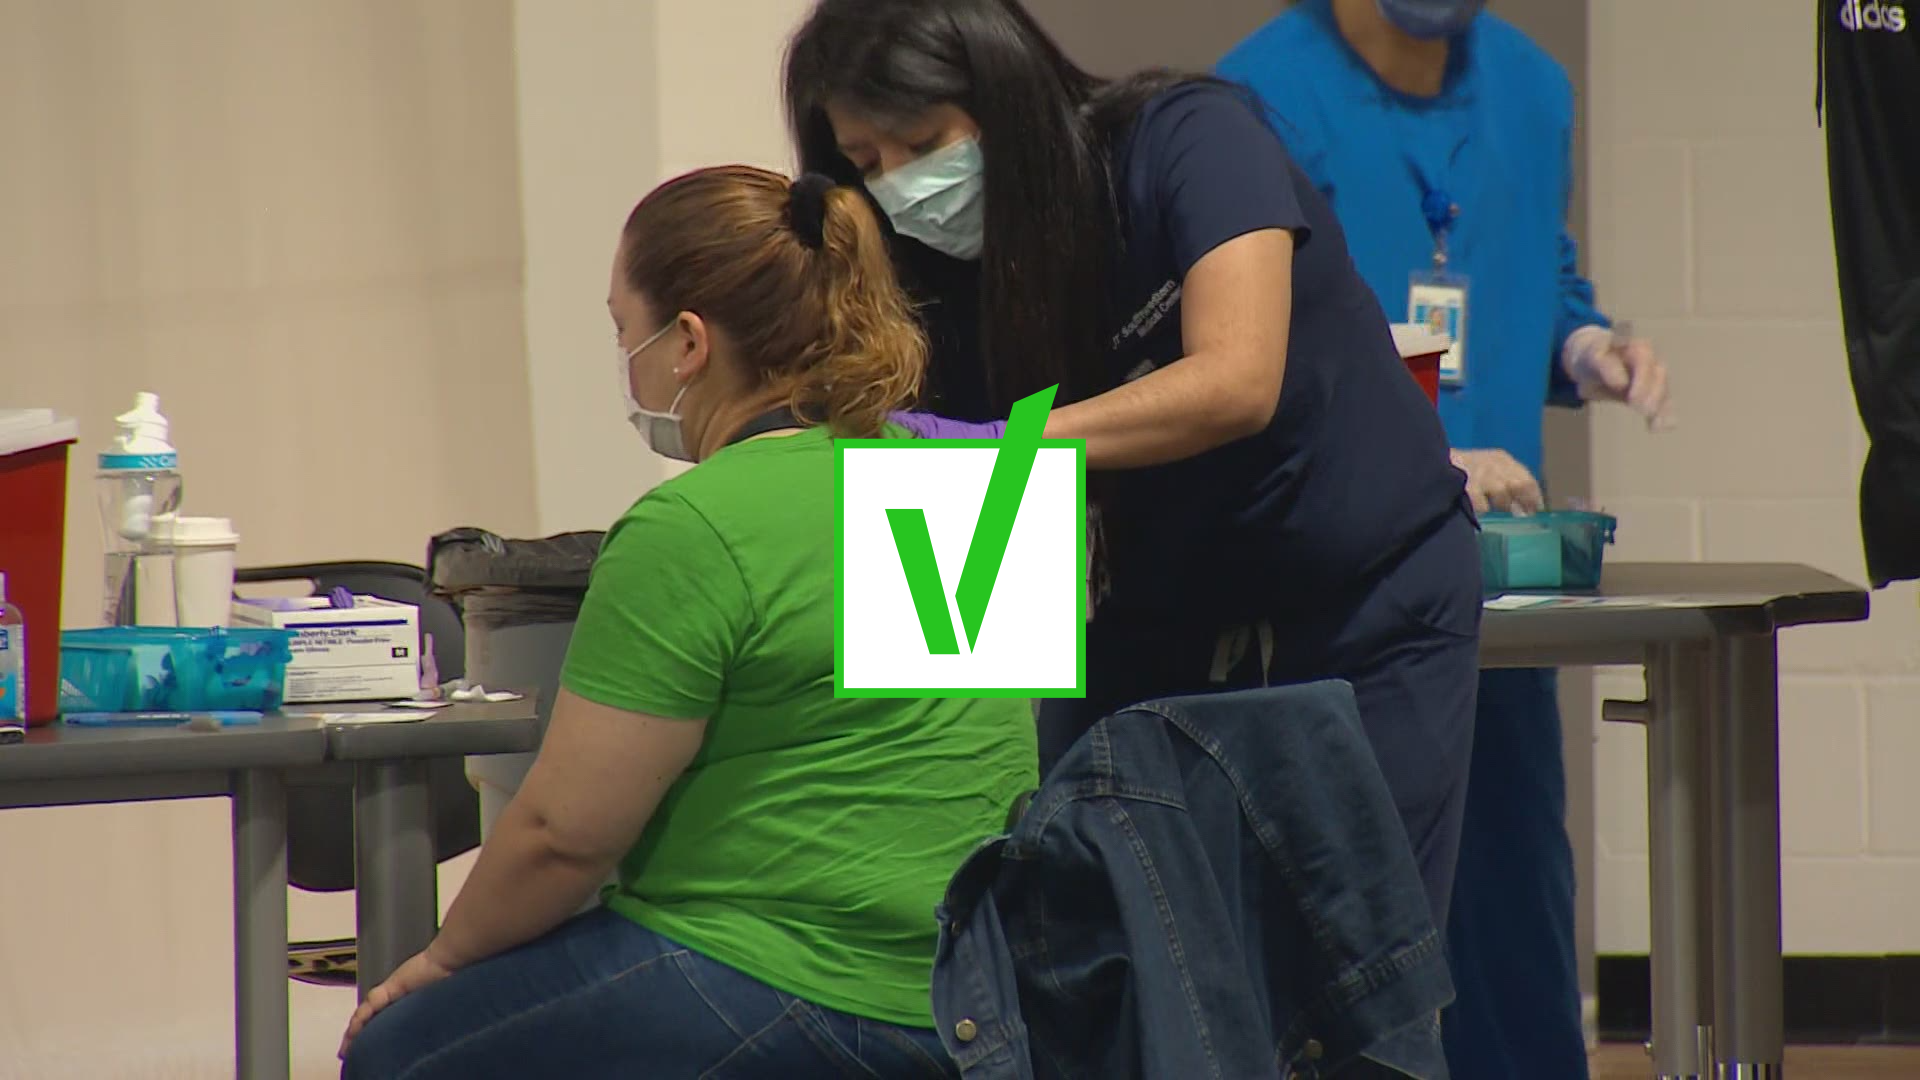 More coronavirus vaccines are on the way to North Texas, and so are more ways to for families to get vaccinated.